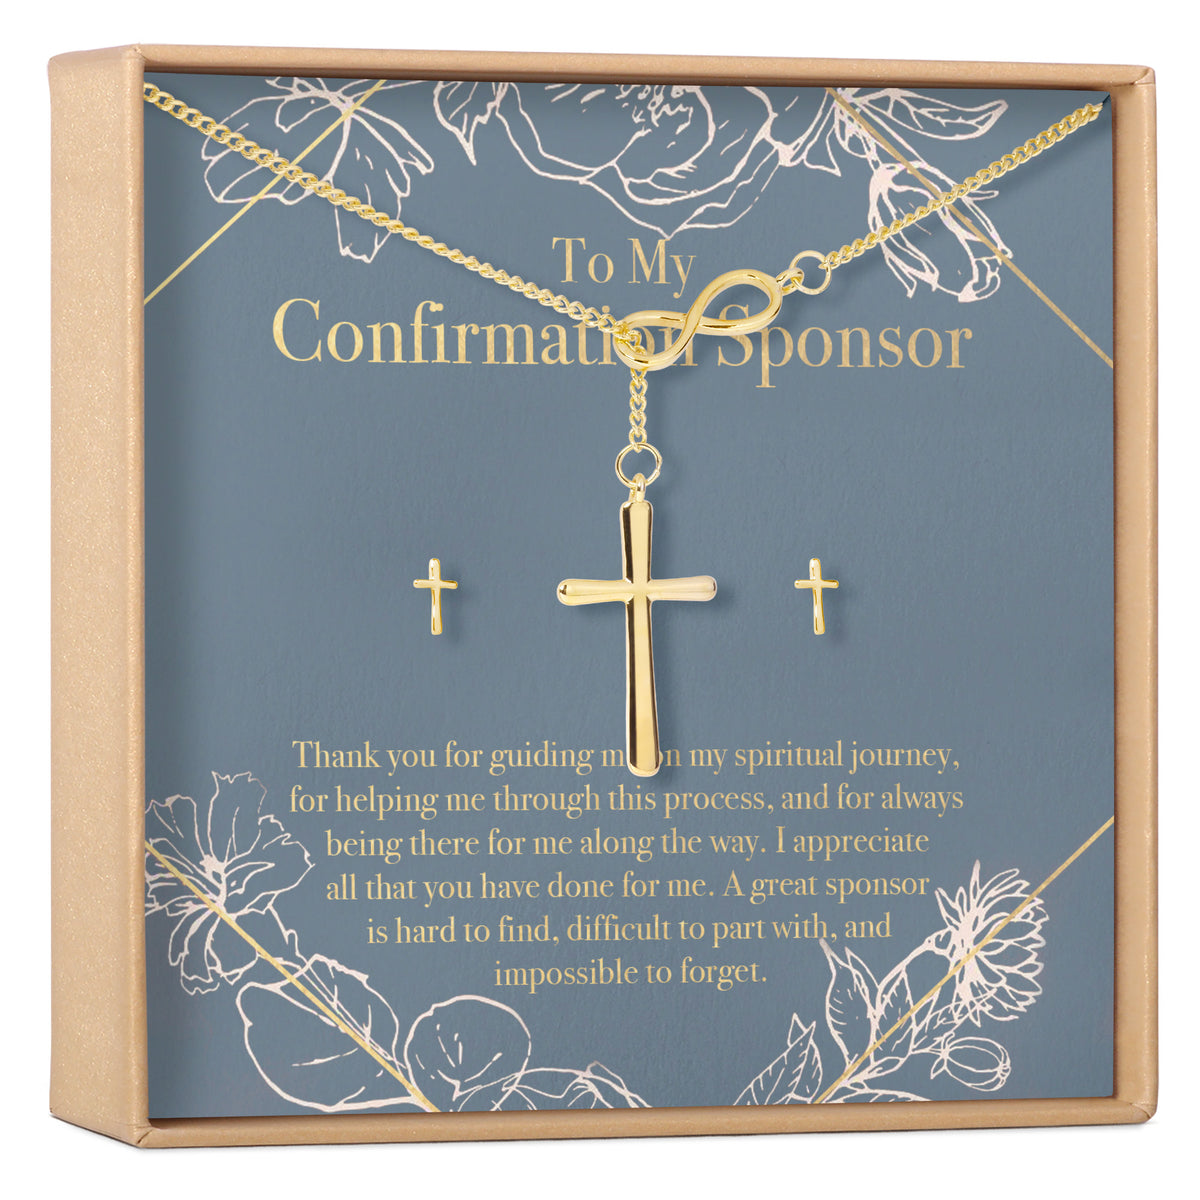 Confirmation Sponsor Cross earring and Necklace Set Jewelry Set